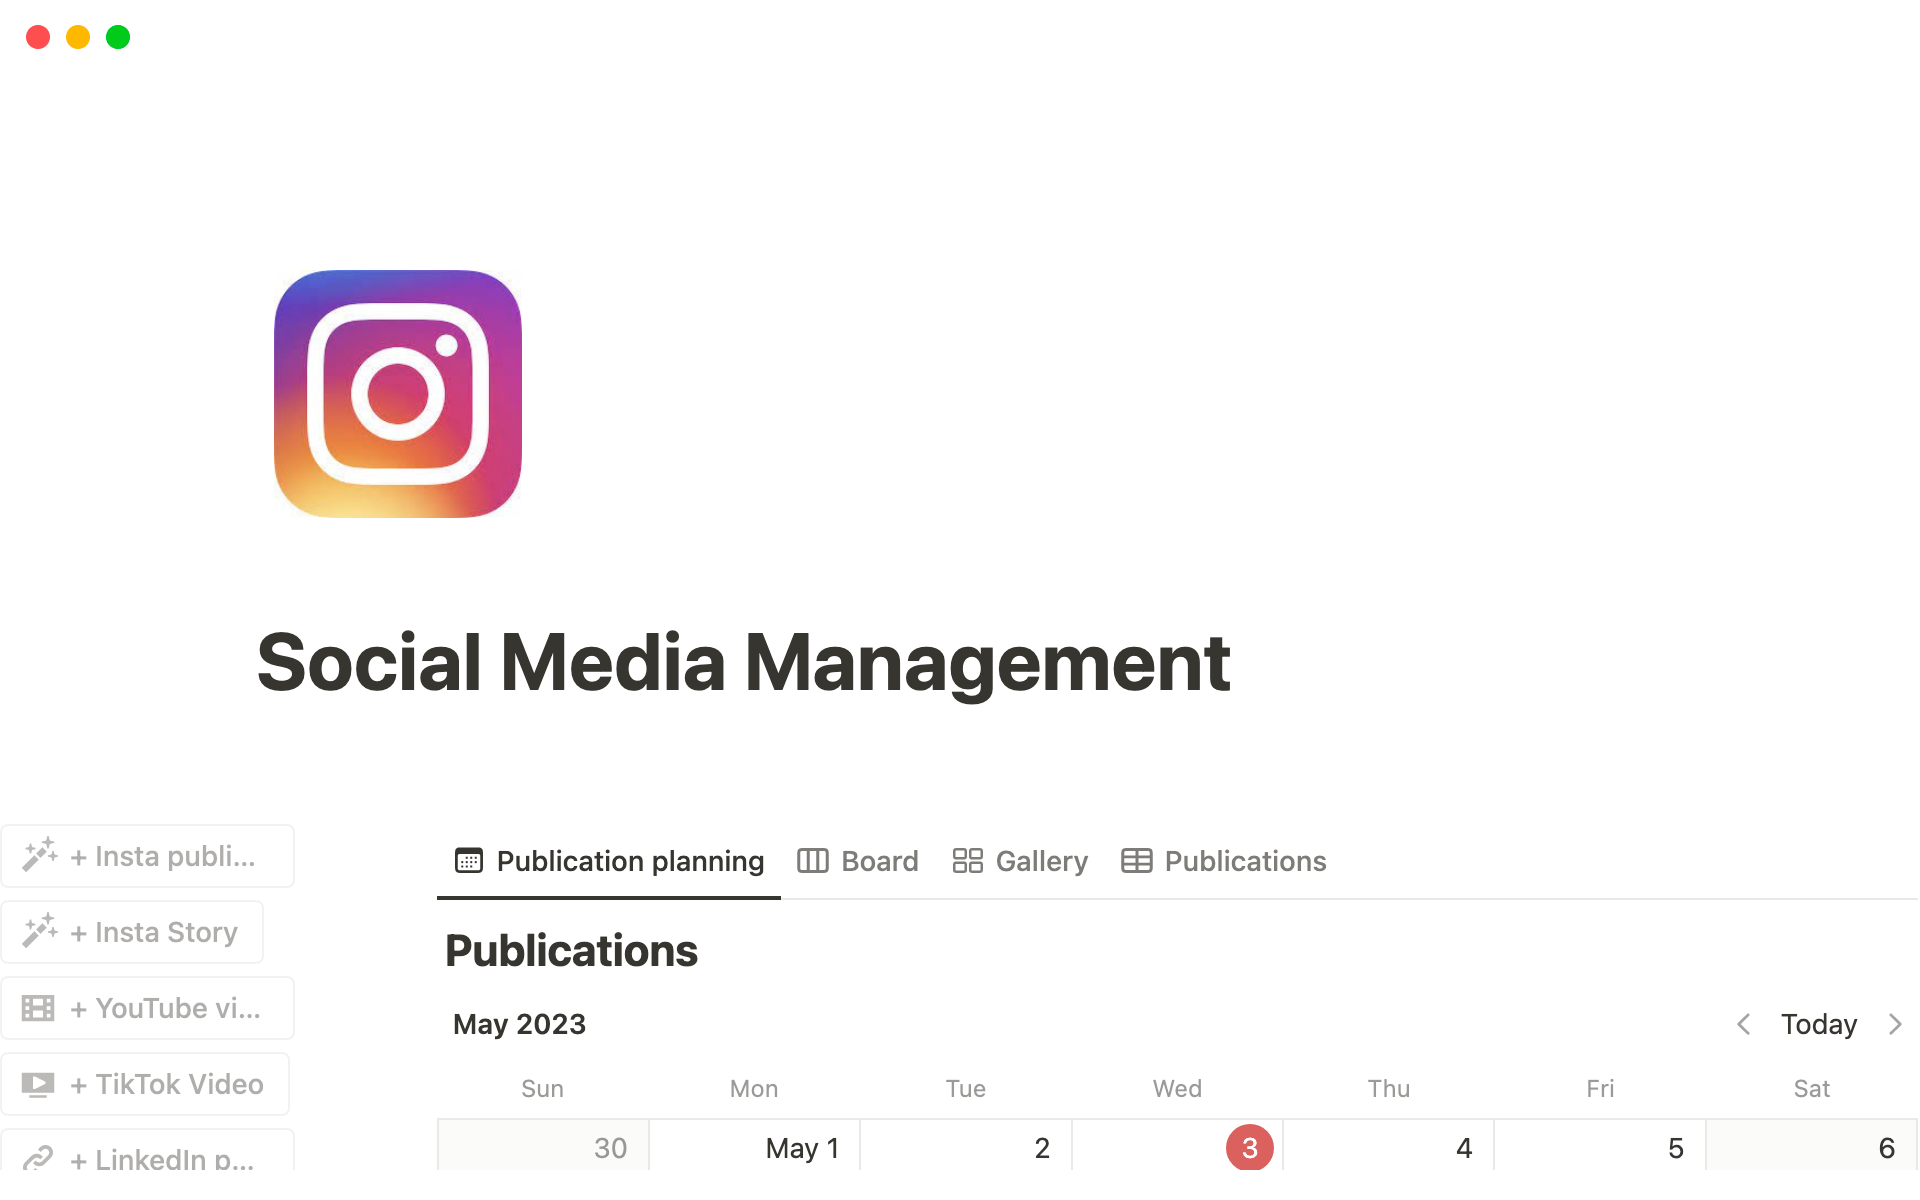 Manage all your social media contents in one place. Make sure they're ready on time for publication